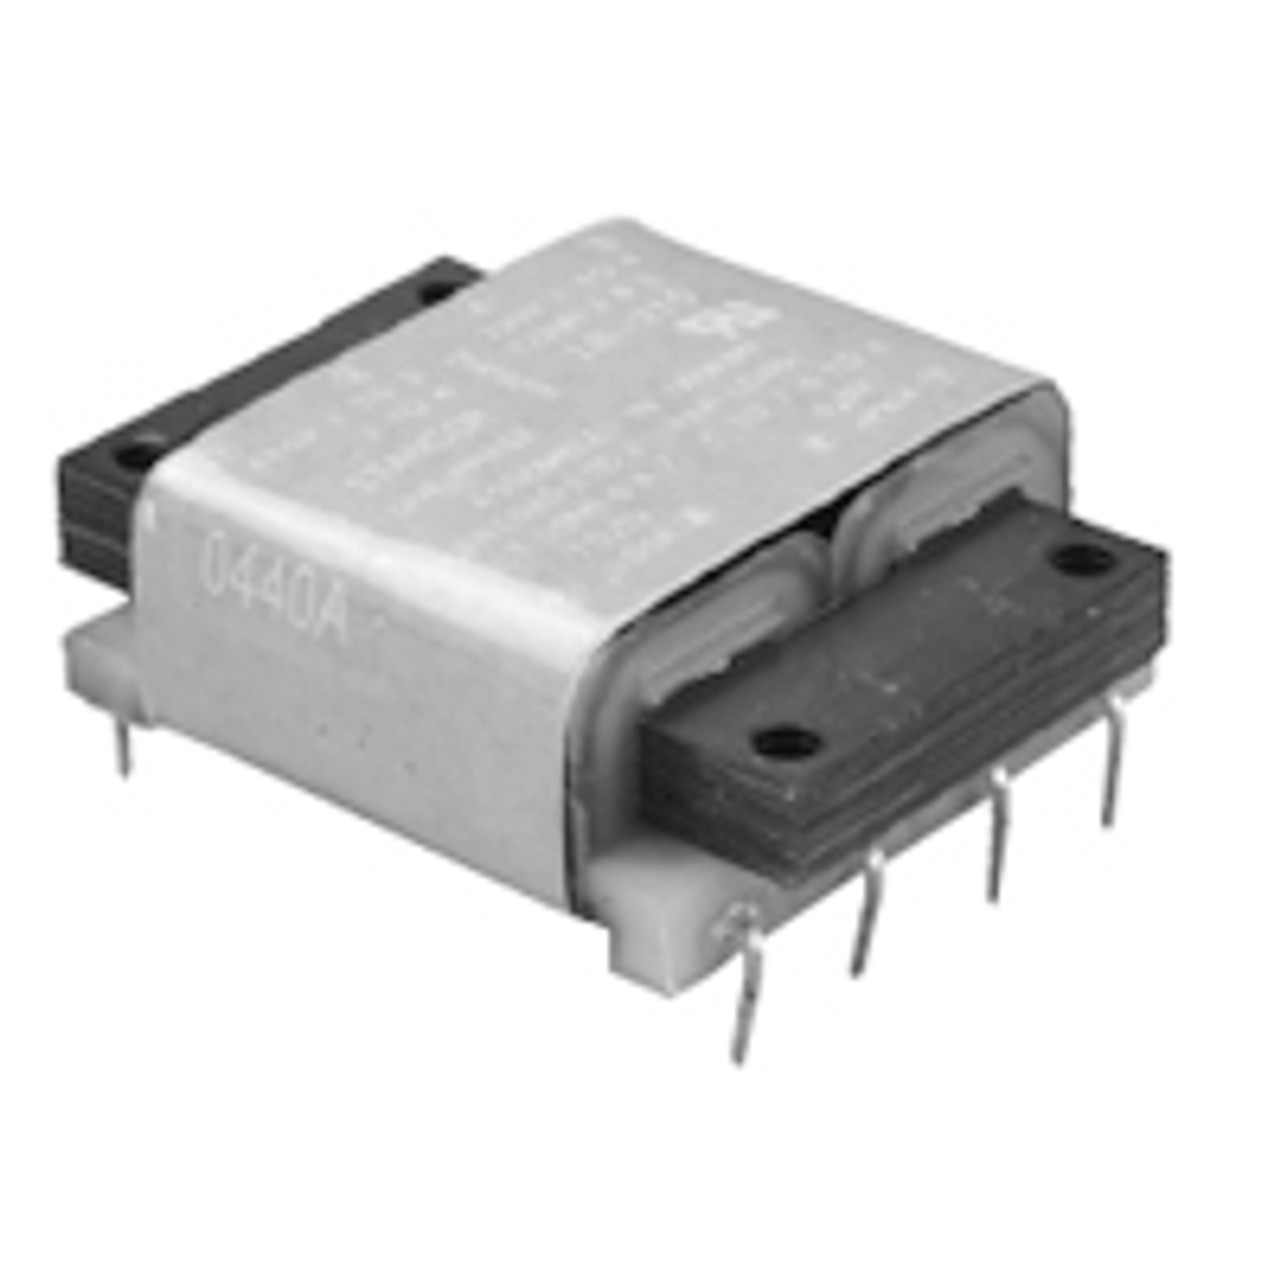 Stancor / White Rodgers LB-1240 Printed Circuit Transformers